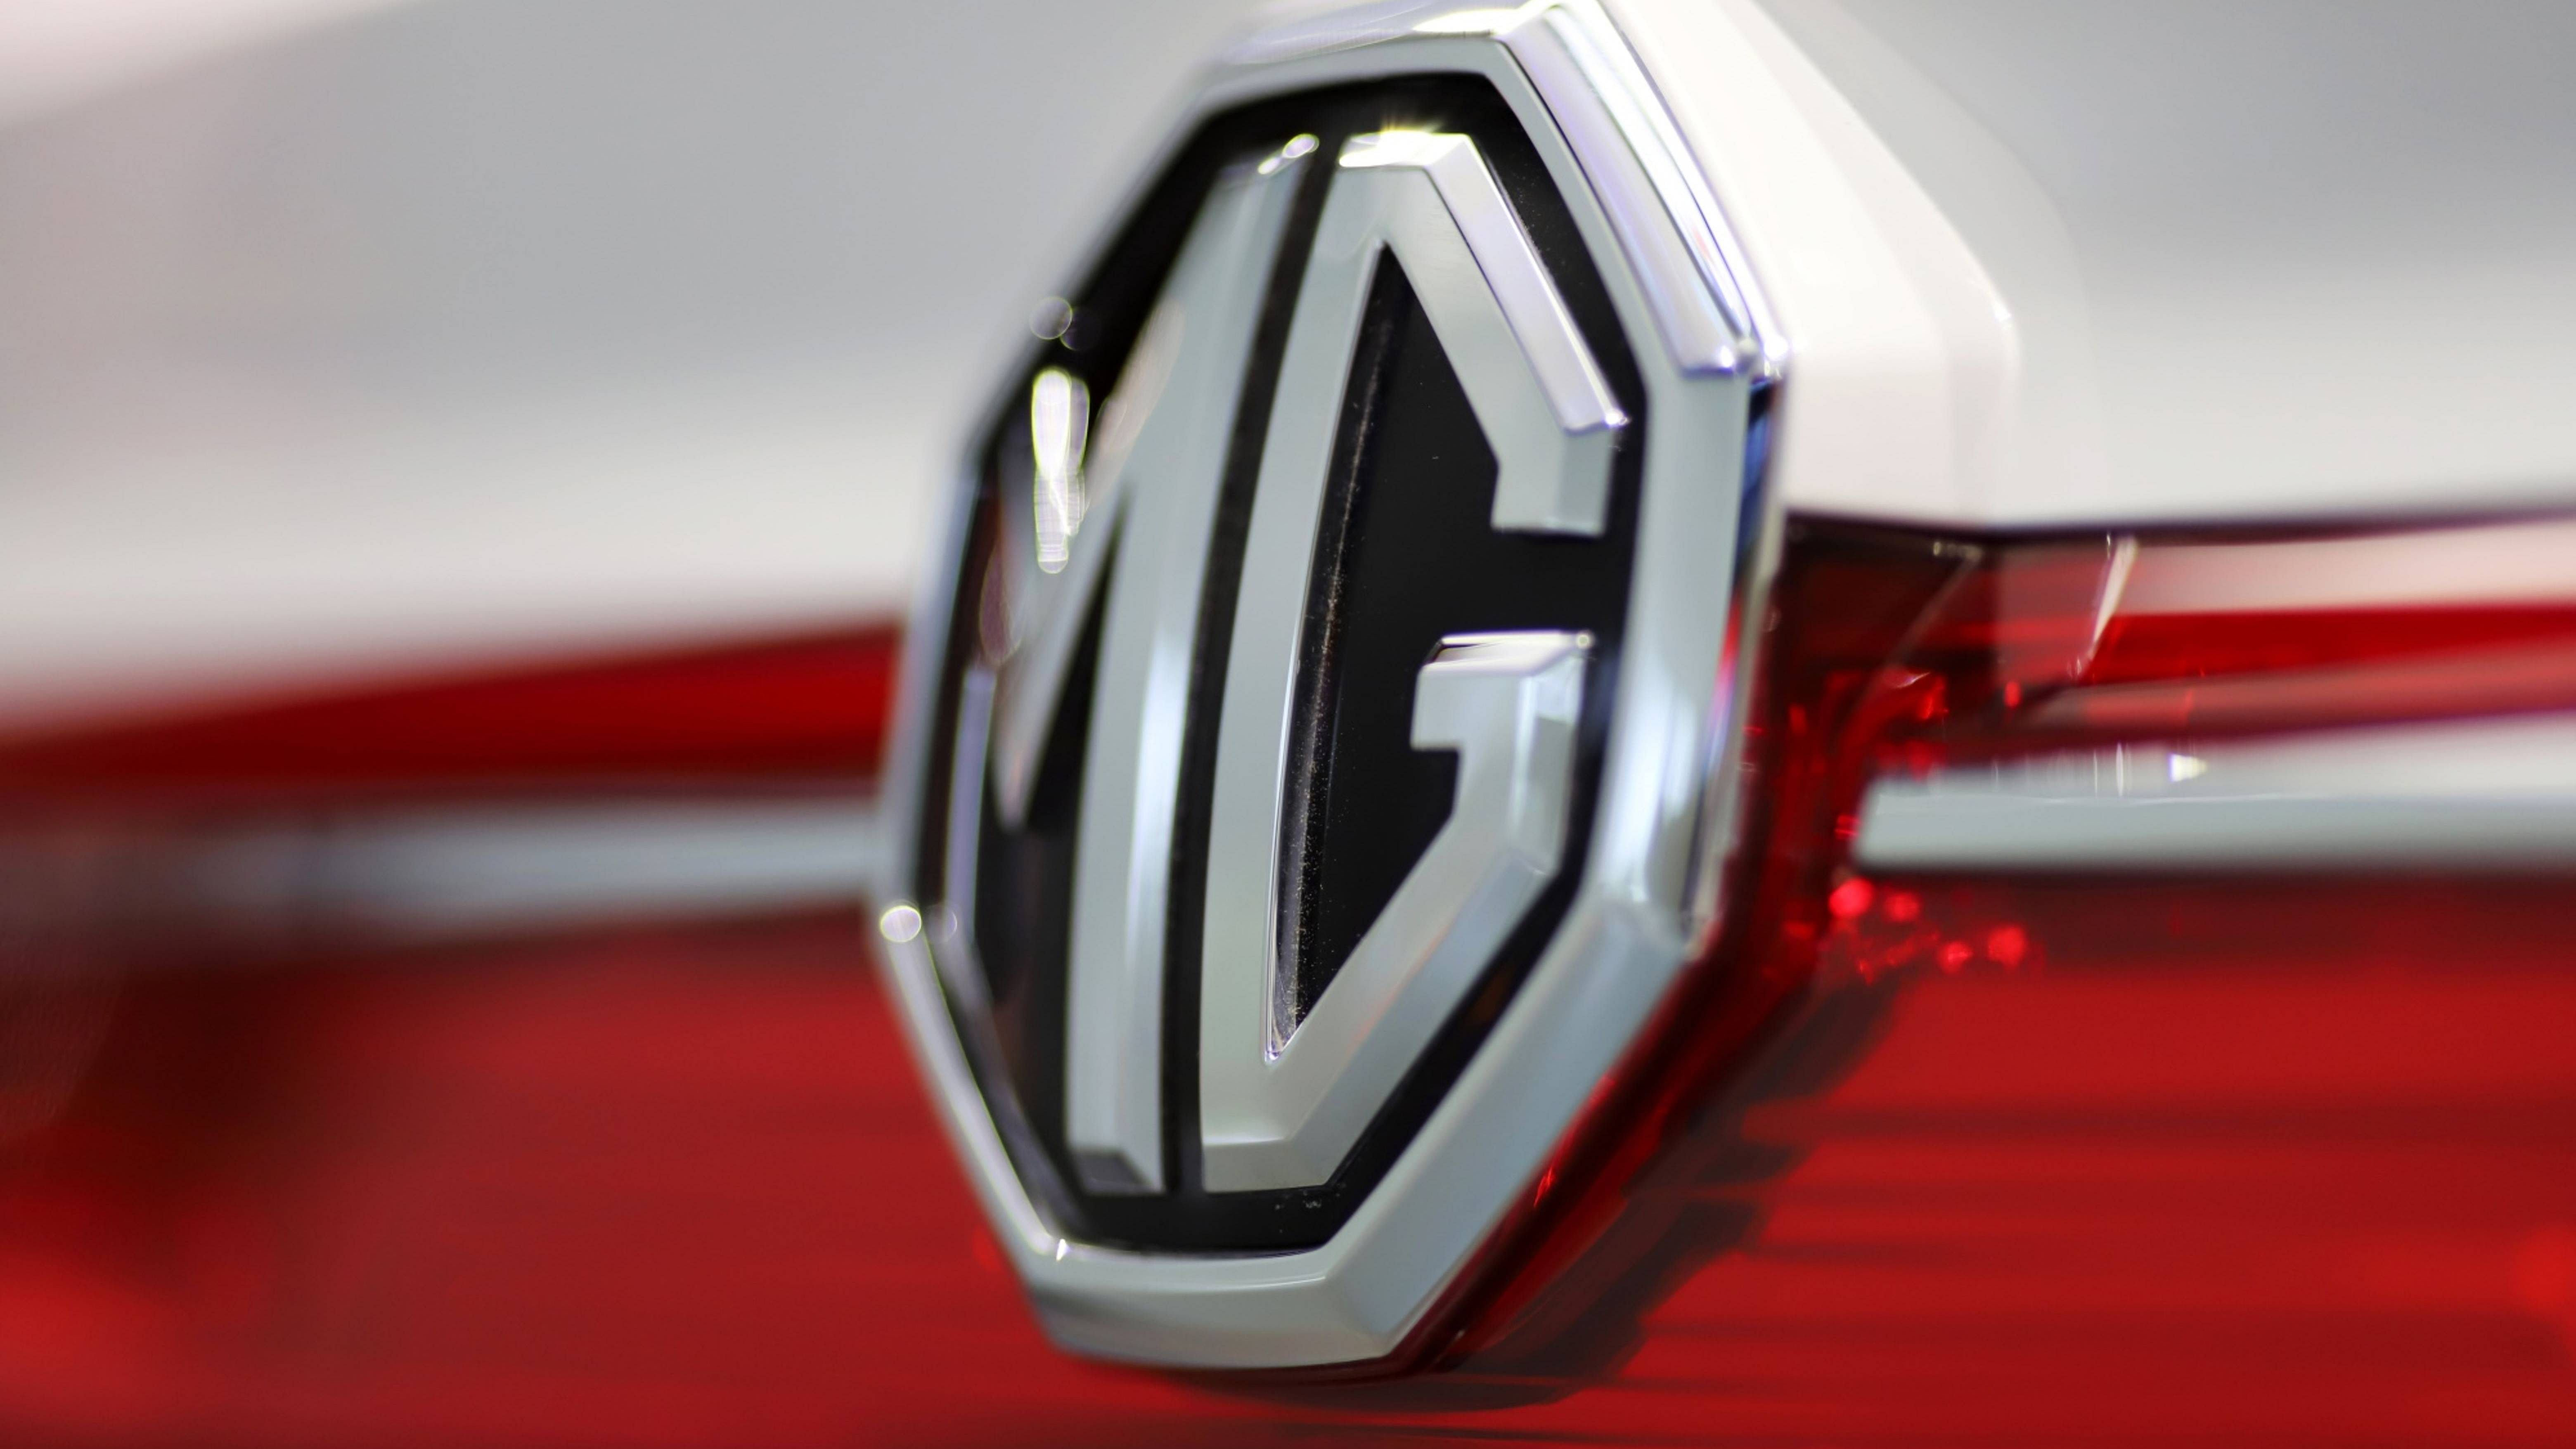 MG Motor said it has continued to foster EV adoption in the country in the form of multiple industry partnerships such as those for charging station installations with JioBP and BPCL. Credit: Bloomberg Photo